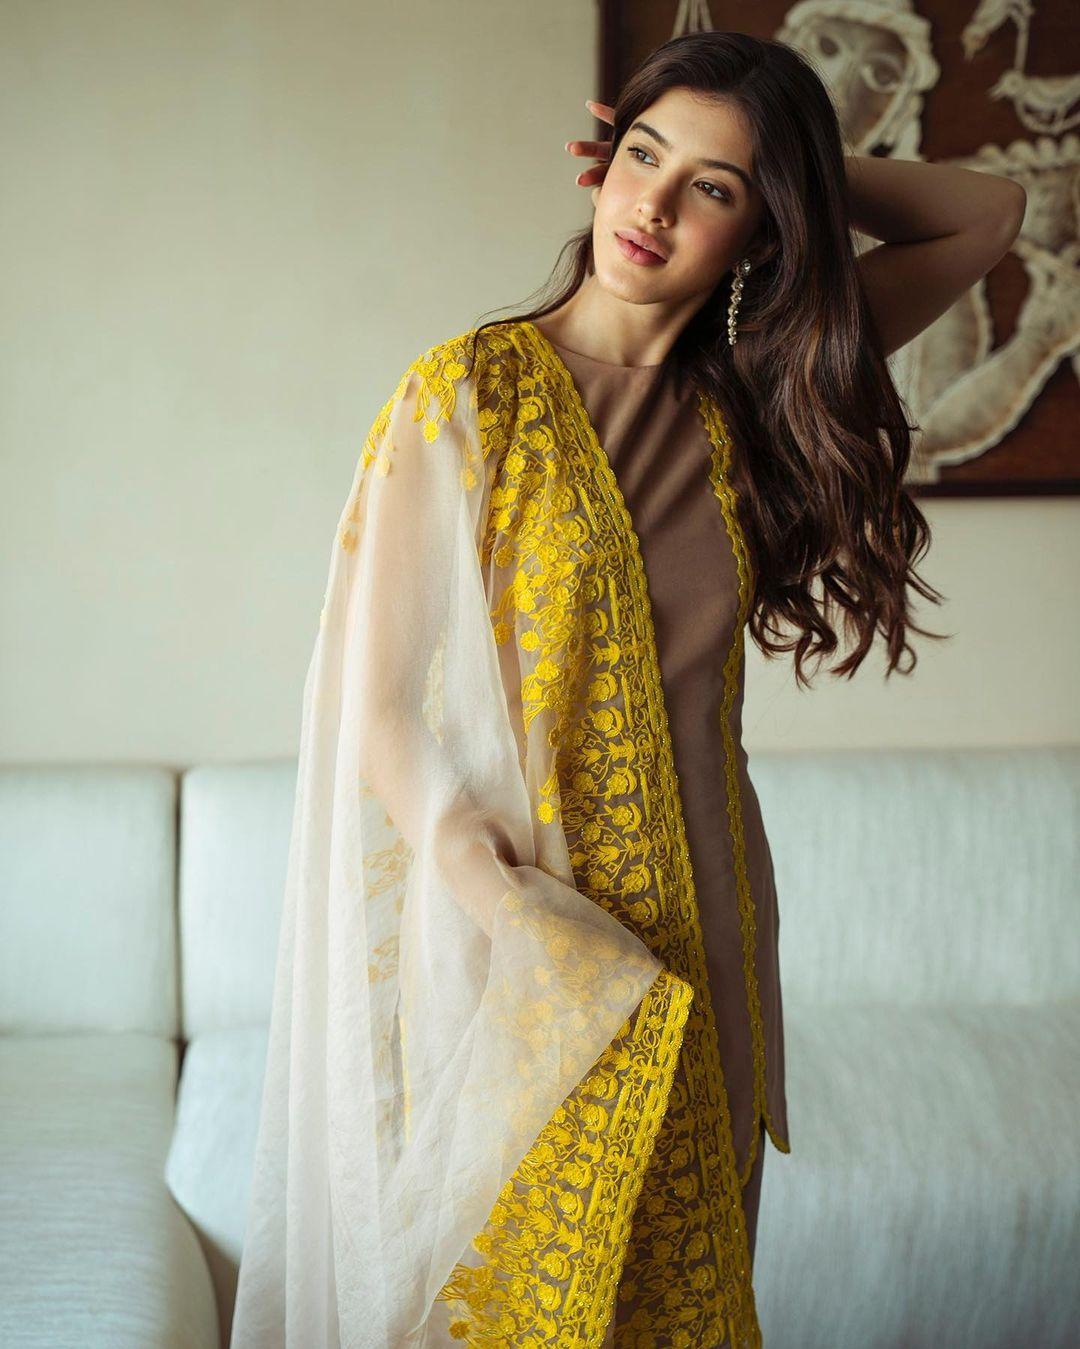 Shanaya Kapoor has a knack for ethnic wear. In this look, the actress wore a beige kurta set and paired it with a matching dupatta adorned with beautiful yellow embroidery